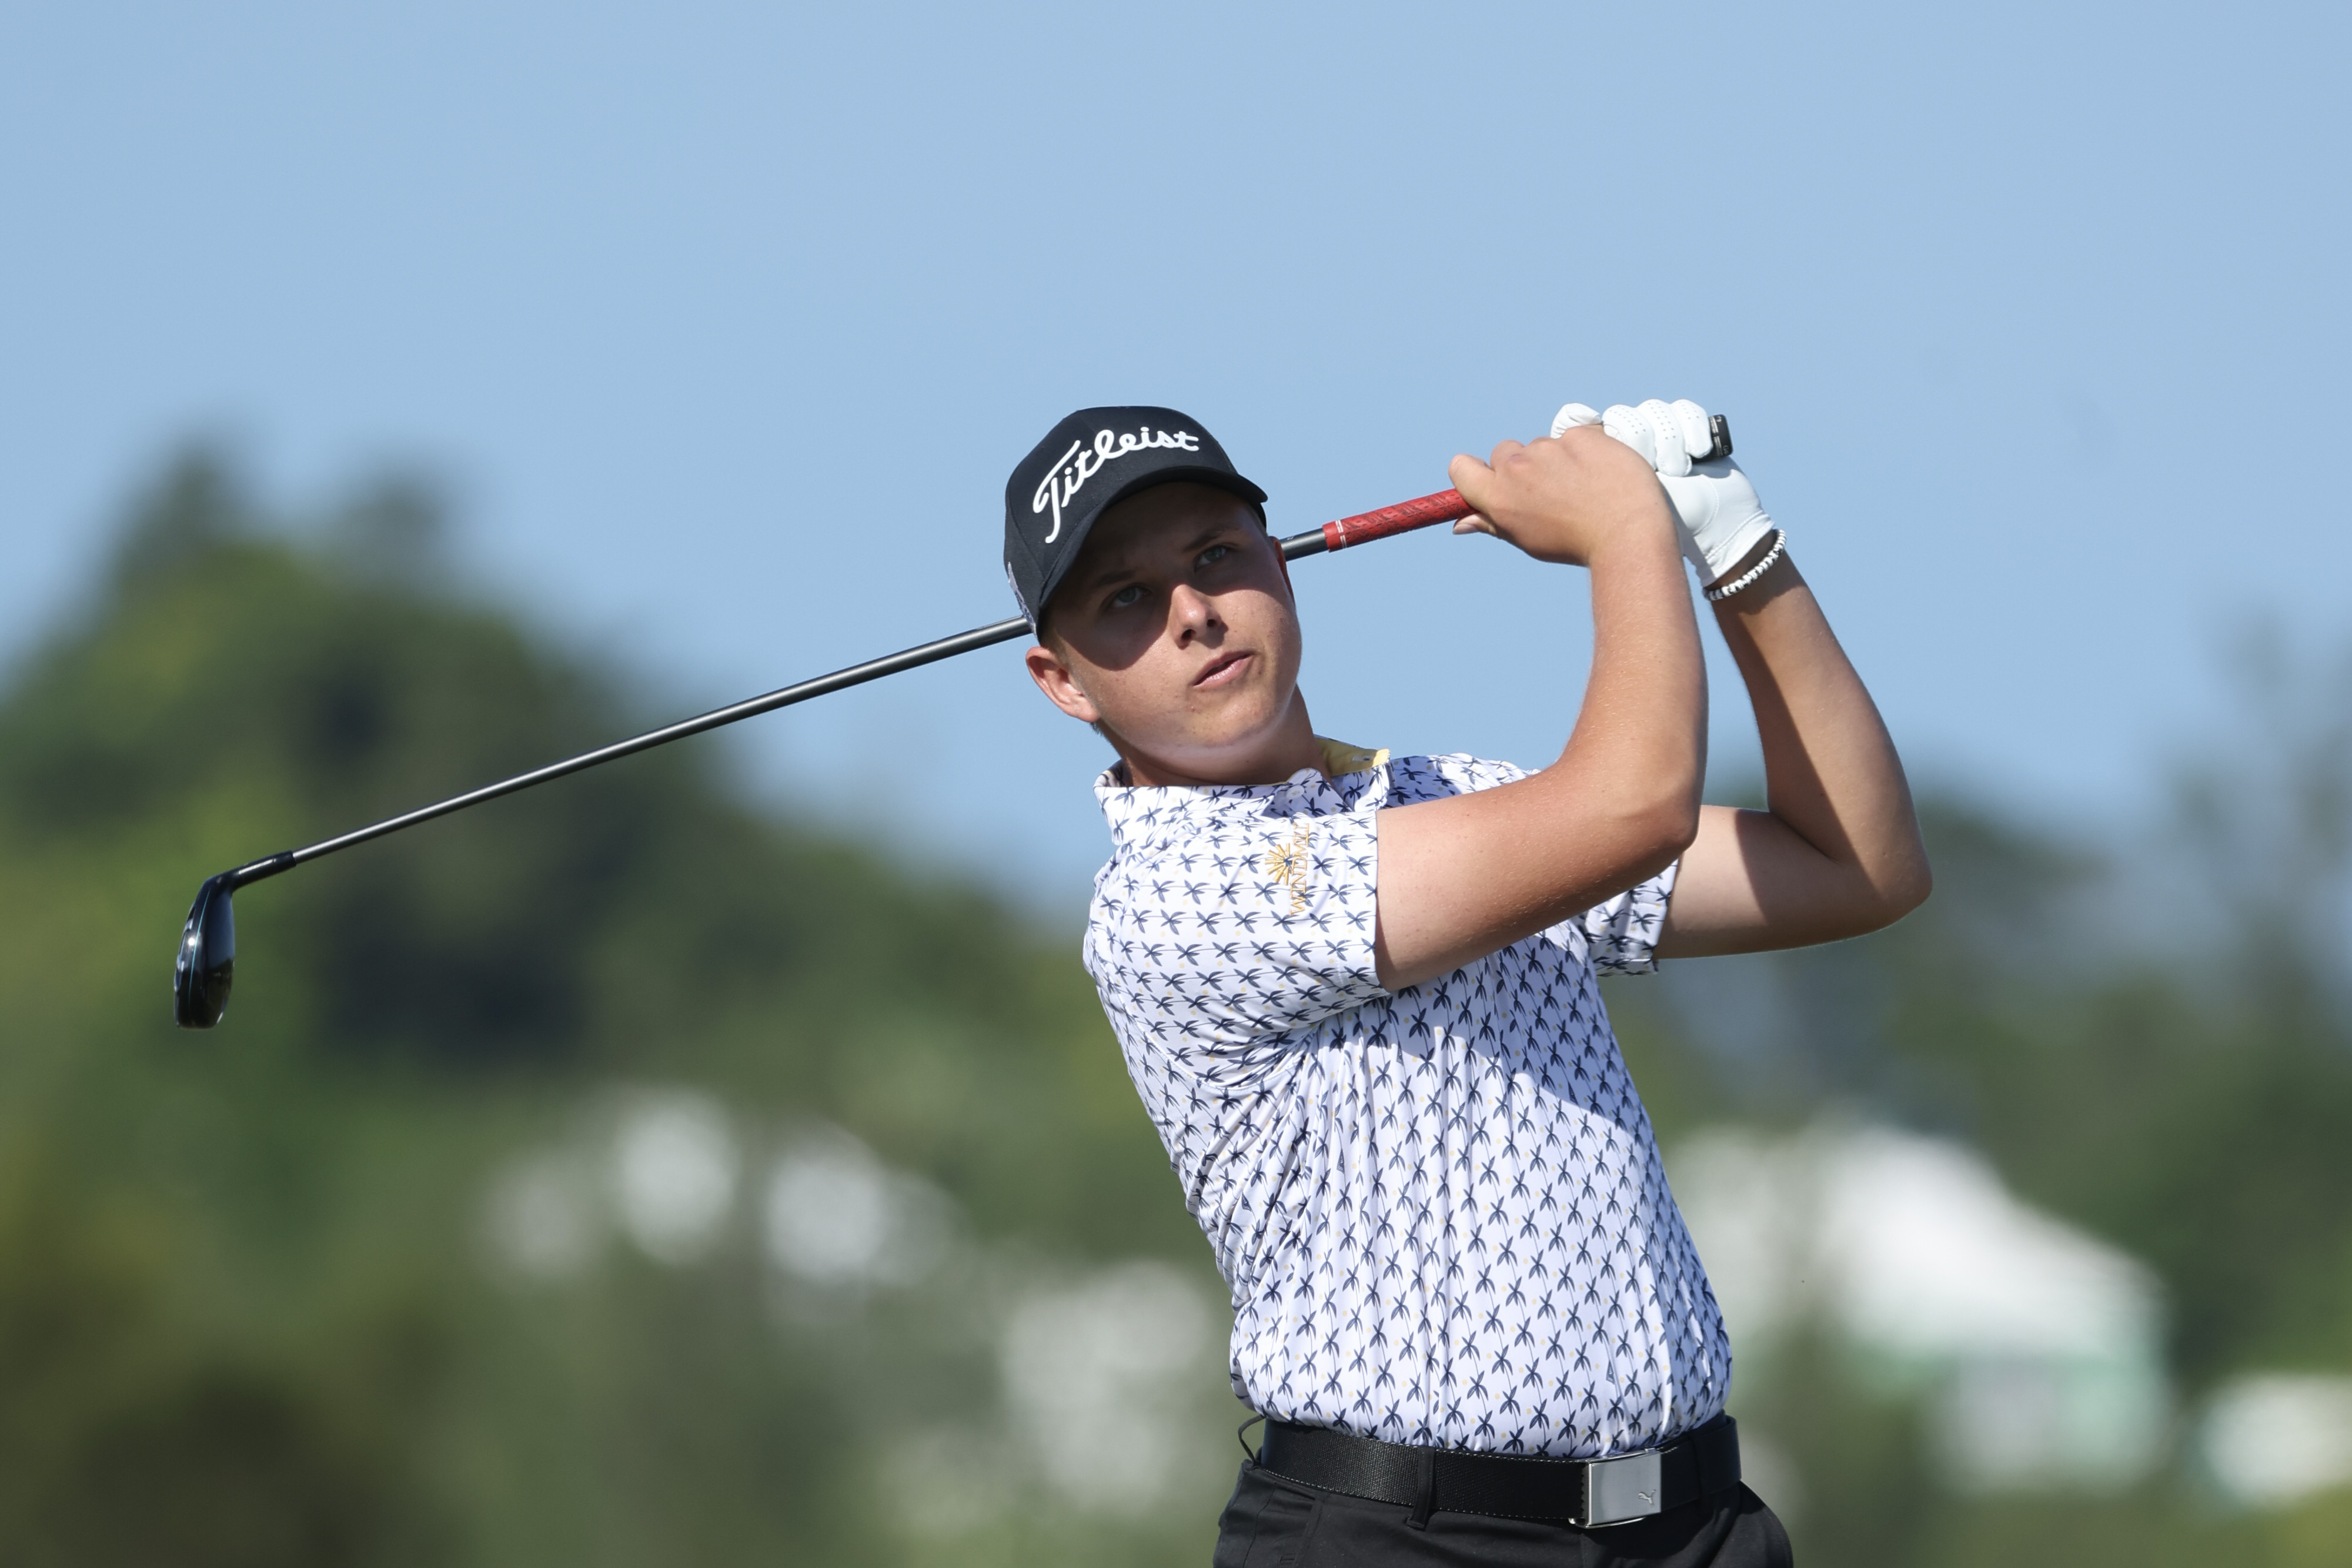 Most 15-year-olds went to school on Thursday before going home and doing homework or playing video games with friends.  Not <a href="https://golfweek.usatoday.com/2023/10/23/15-year-old-oliver-betschart-qualifies-pga-tour-butterfield-bermuda-championship/" rel="noopener">Oliver Betschart</a>.  The Bermuda native qualified for the tournament and is the youngest person to tee it up on the PGA Tour since 2014.  In the opening round, he was 1 over through 15 holes when the horn blew to conclude play for the day. In his round, he has three birdies, two bogeys and a double. He is on the par-5 seventh hole when play resumes.